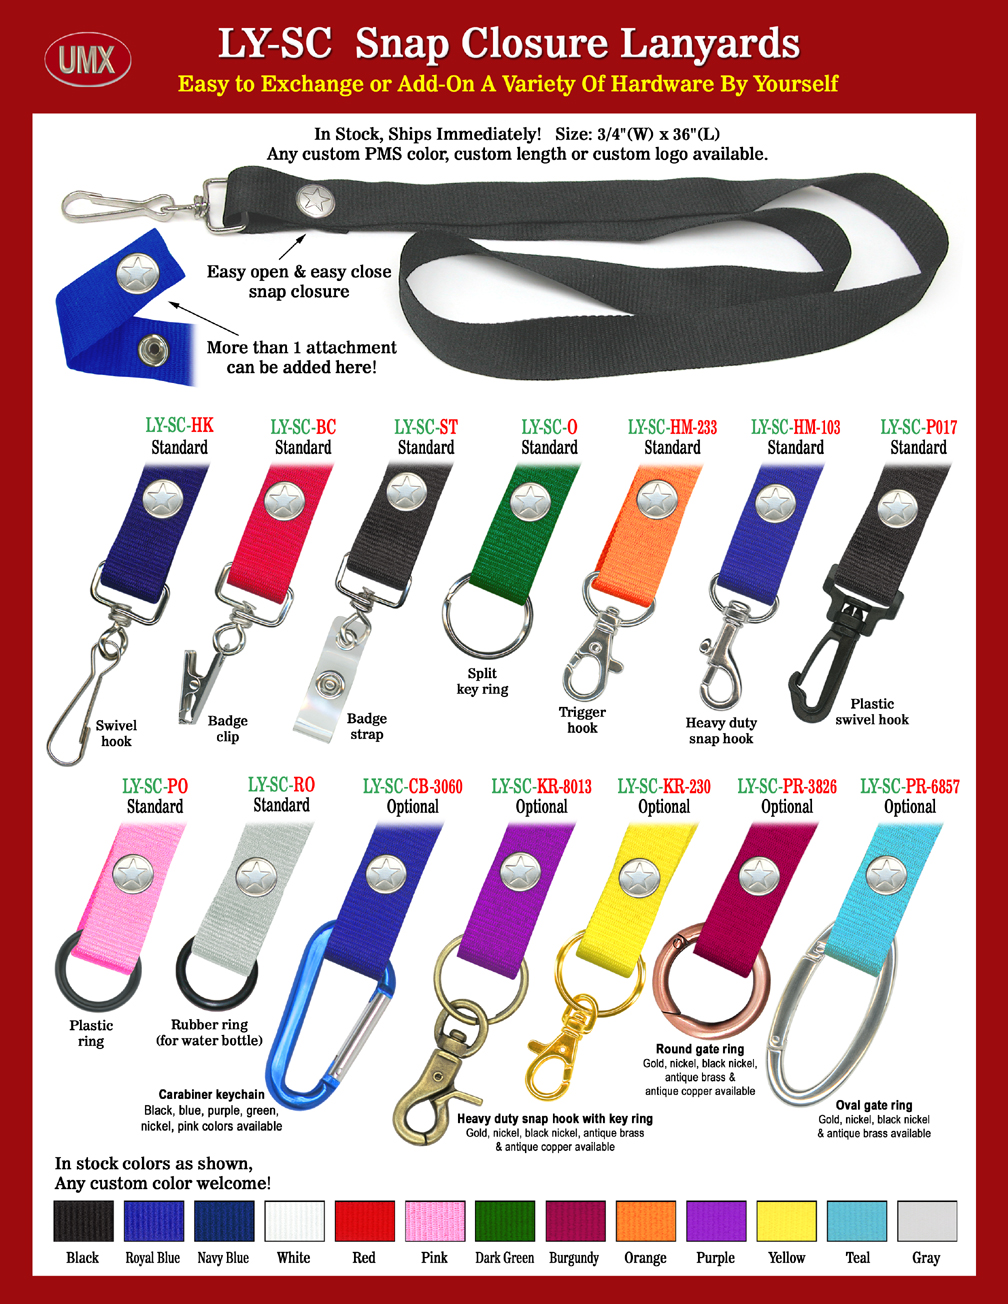 The 3/4" wide by 36" long heavy duty plain snap closure lanyards come with 13 colors available, black, royal blue, navy blue, red, dark green, orange, yellow, pink, gray, purple, burgundy and teal colors. 